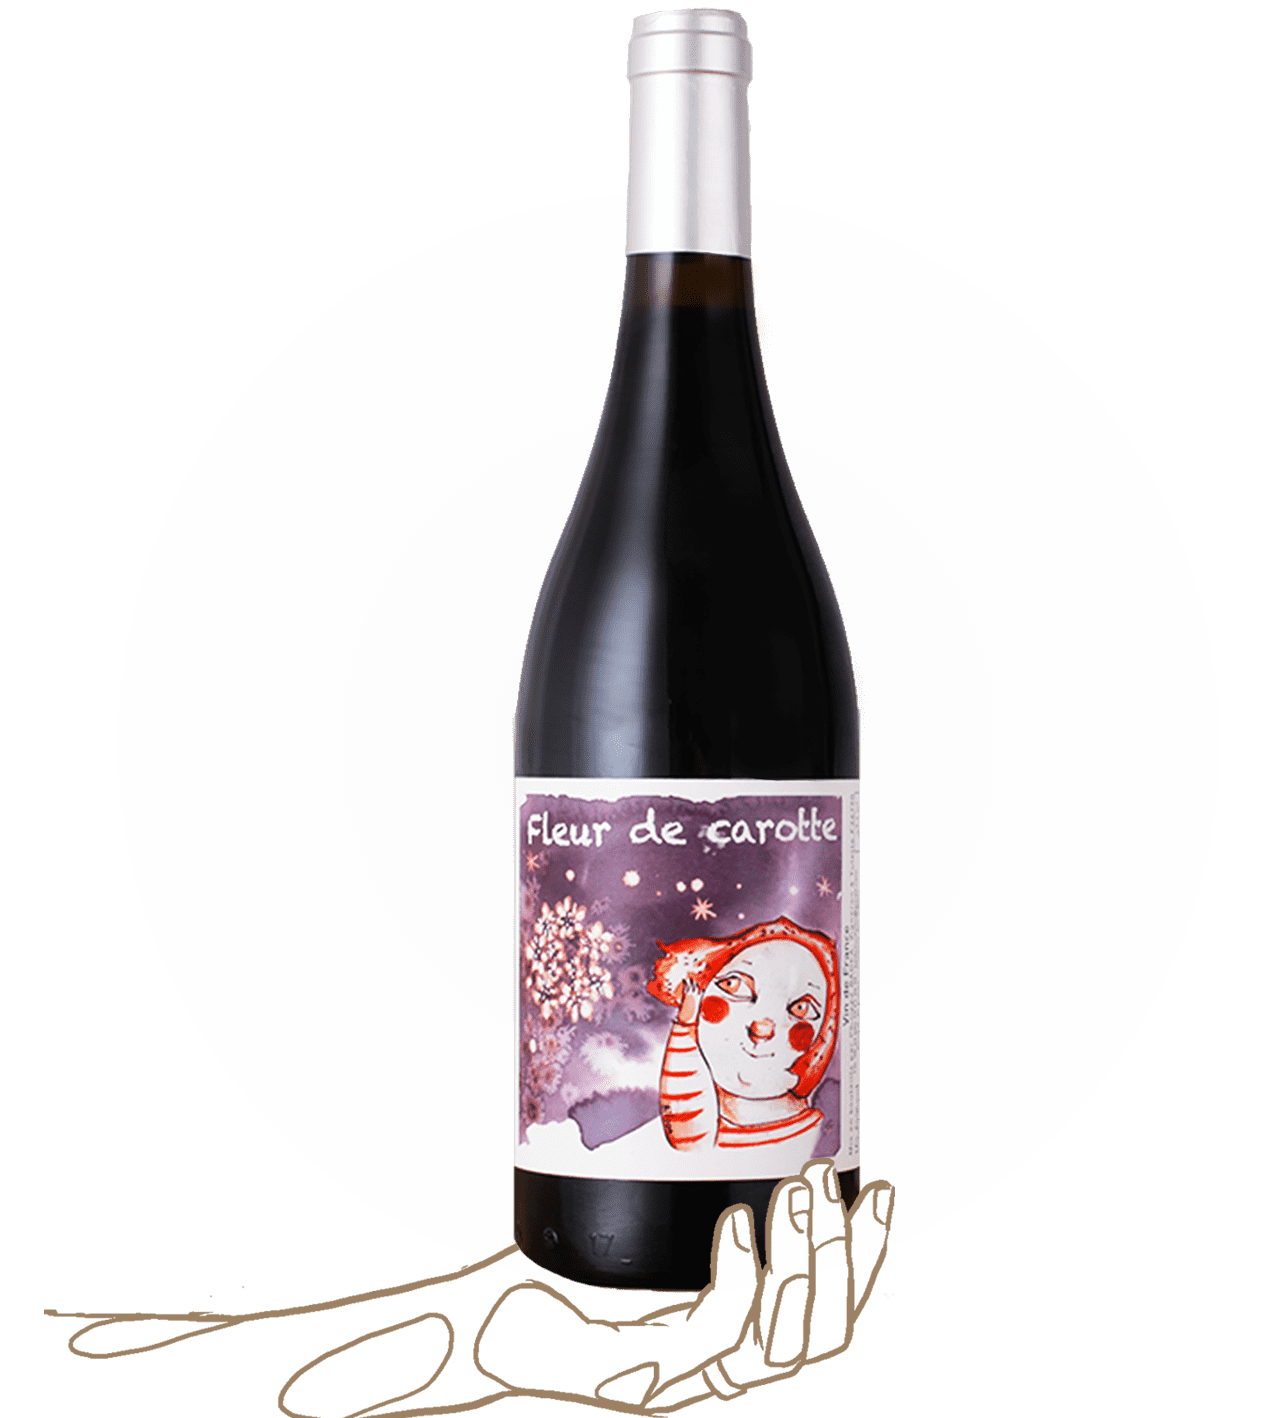 fleur de carotte by Badea is an organic and natural wine from south of france